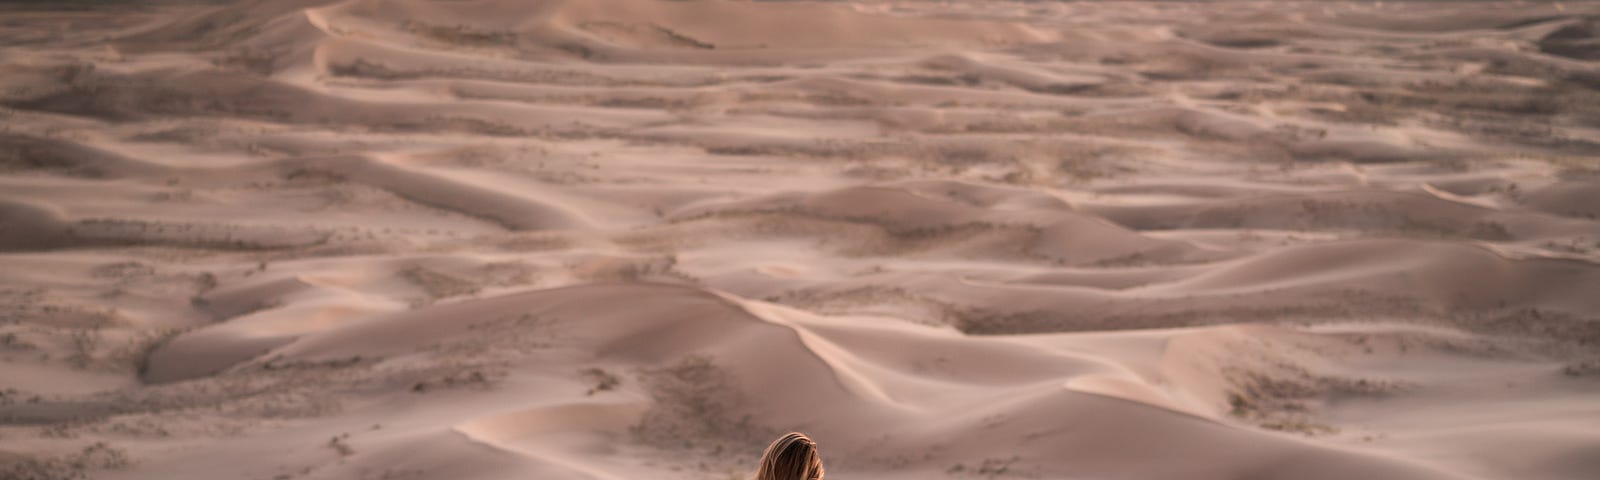 A woman sitting on a dune on a dessert